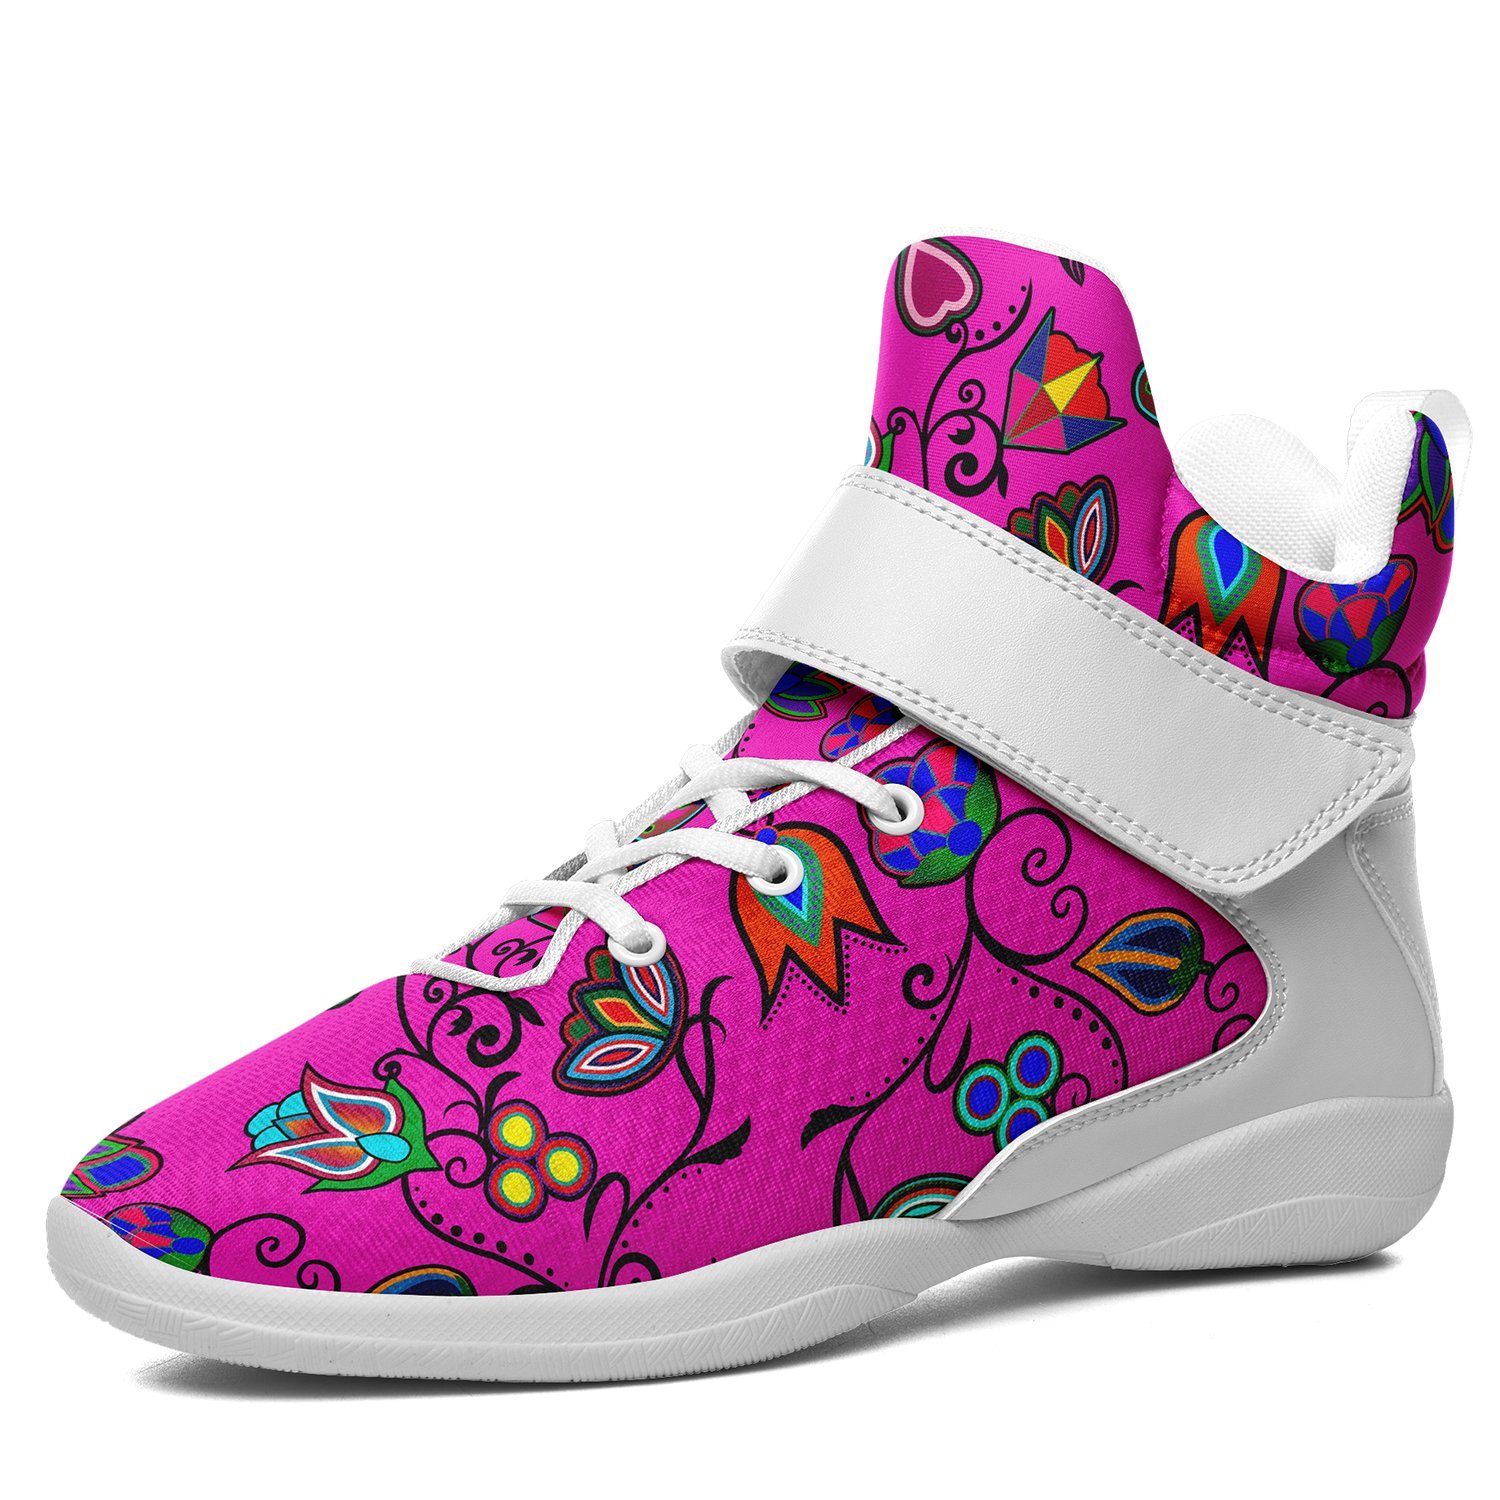 Indigenous Paisley Ipottaa Basketball / Sport High Top Shoes 49 Dzine US Women 4.5 / US Youth 3.5 / EUR 35 White Sole with White Strap 